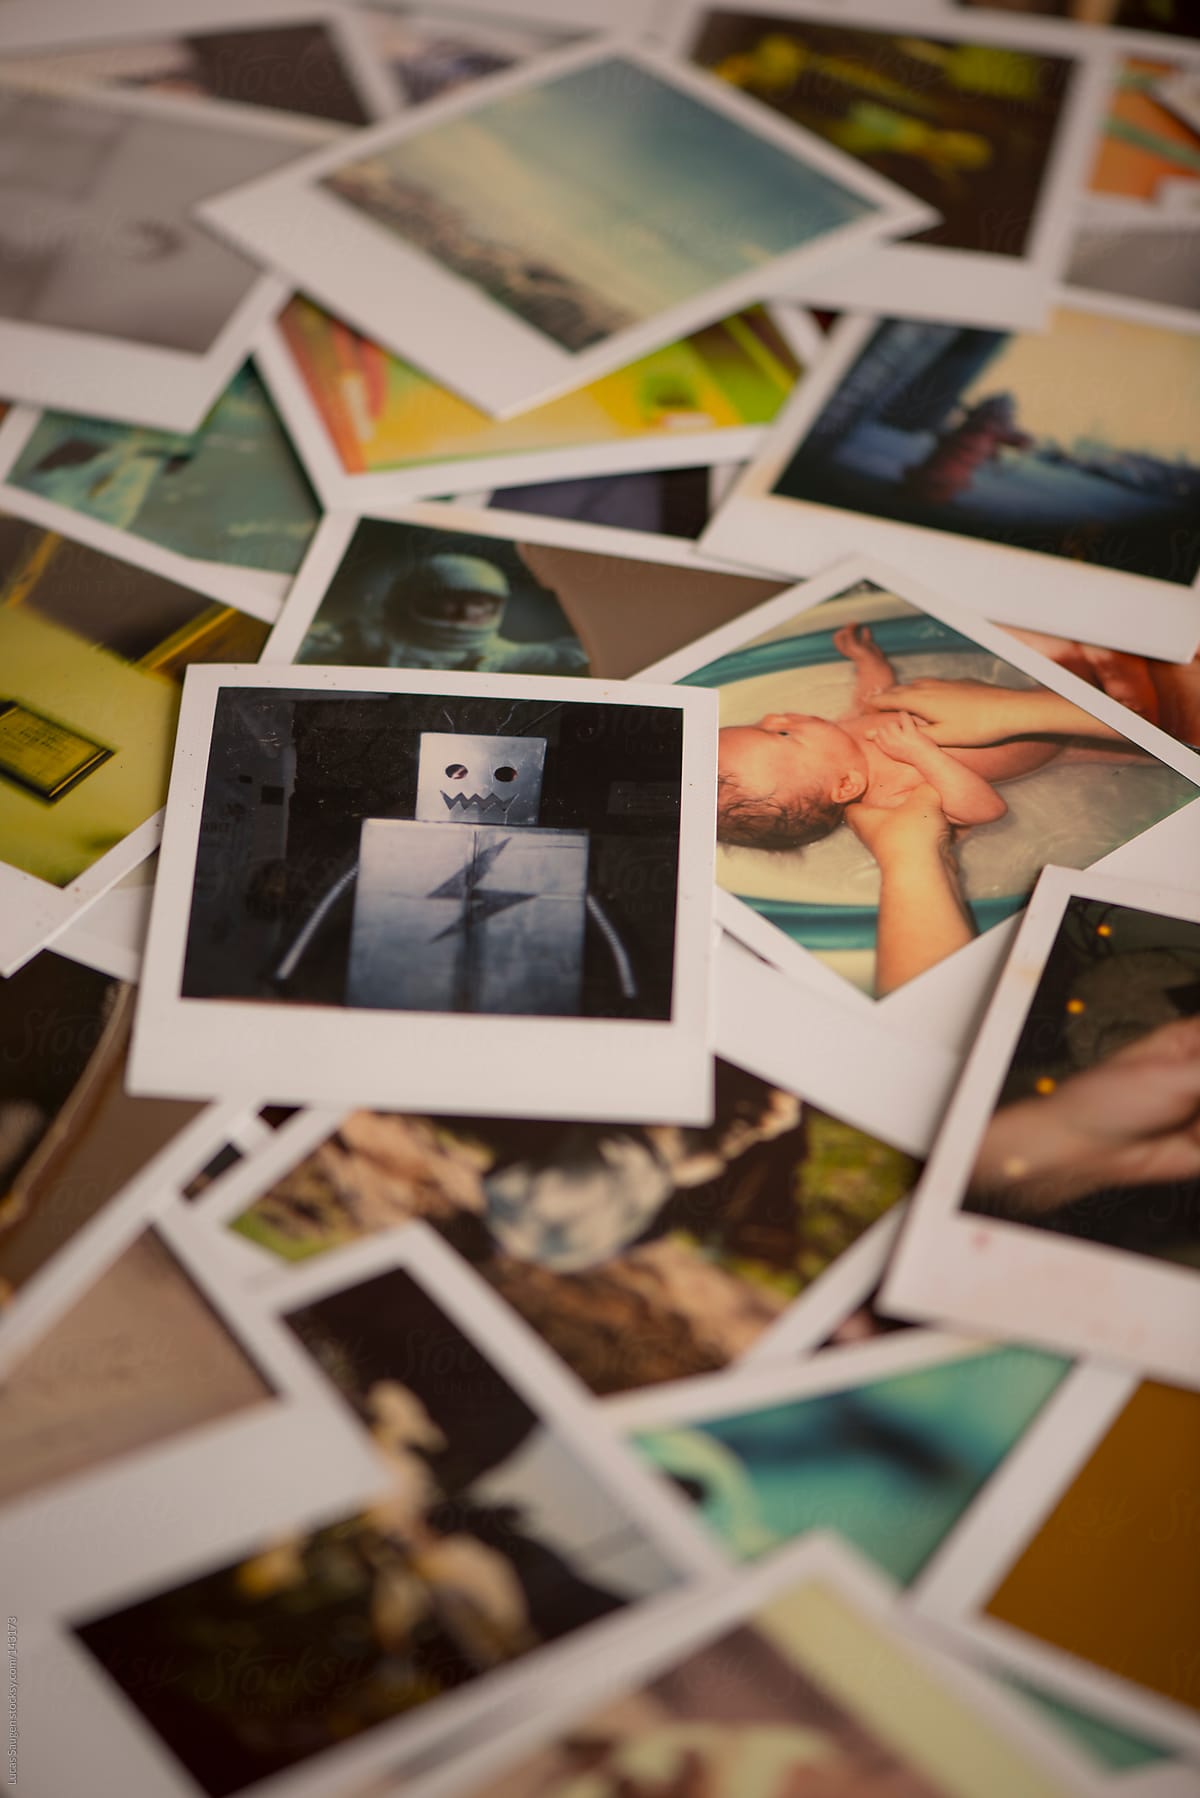 Instant photos in a pile including one of a robot costume and one of a newborn baby getting a bath.